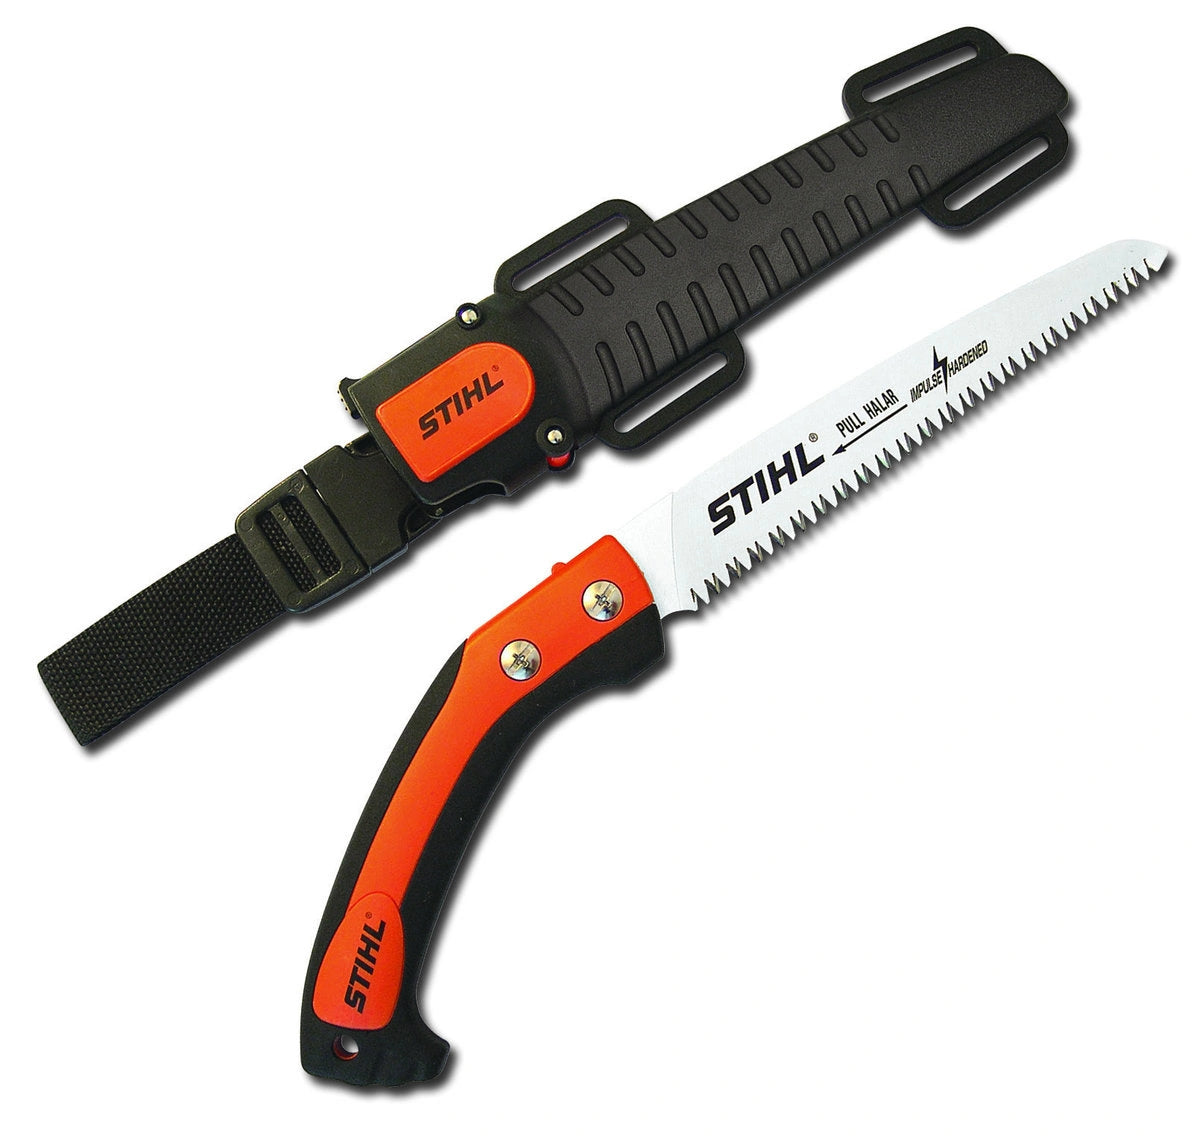 PS 40 Pruning Saw